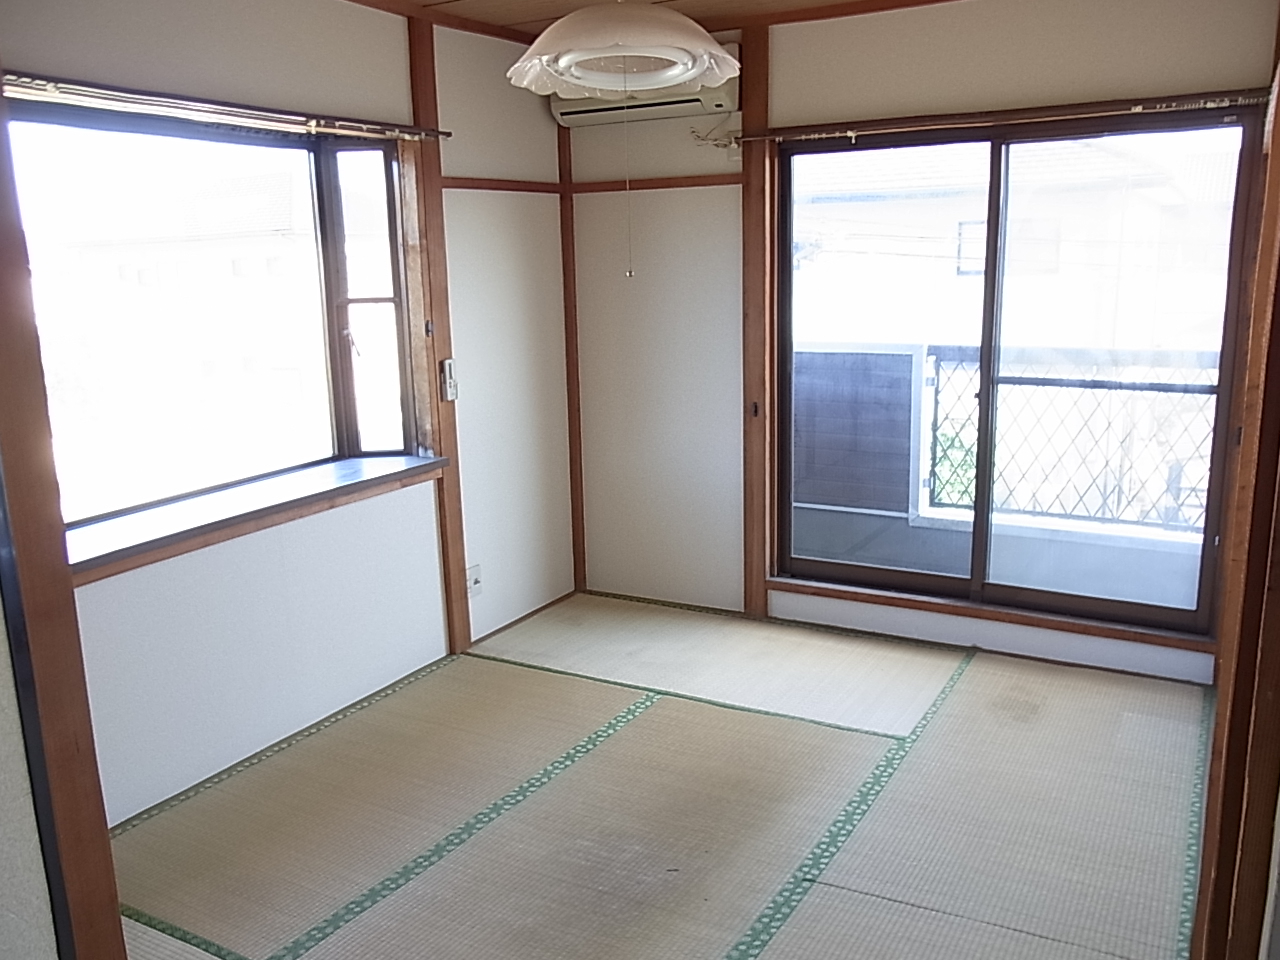 Living and room. Than Japanese-style entrance